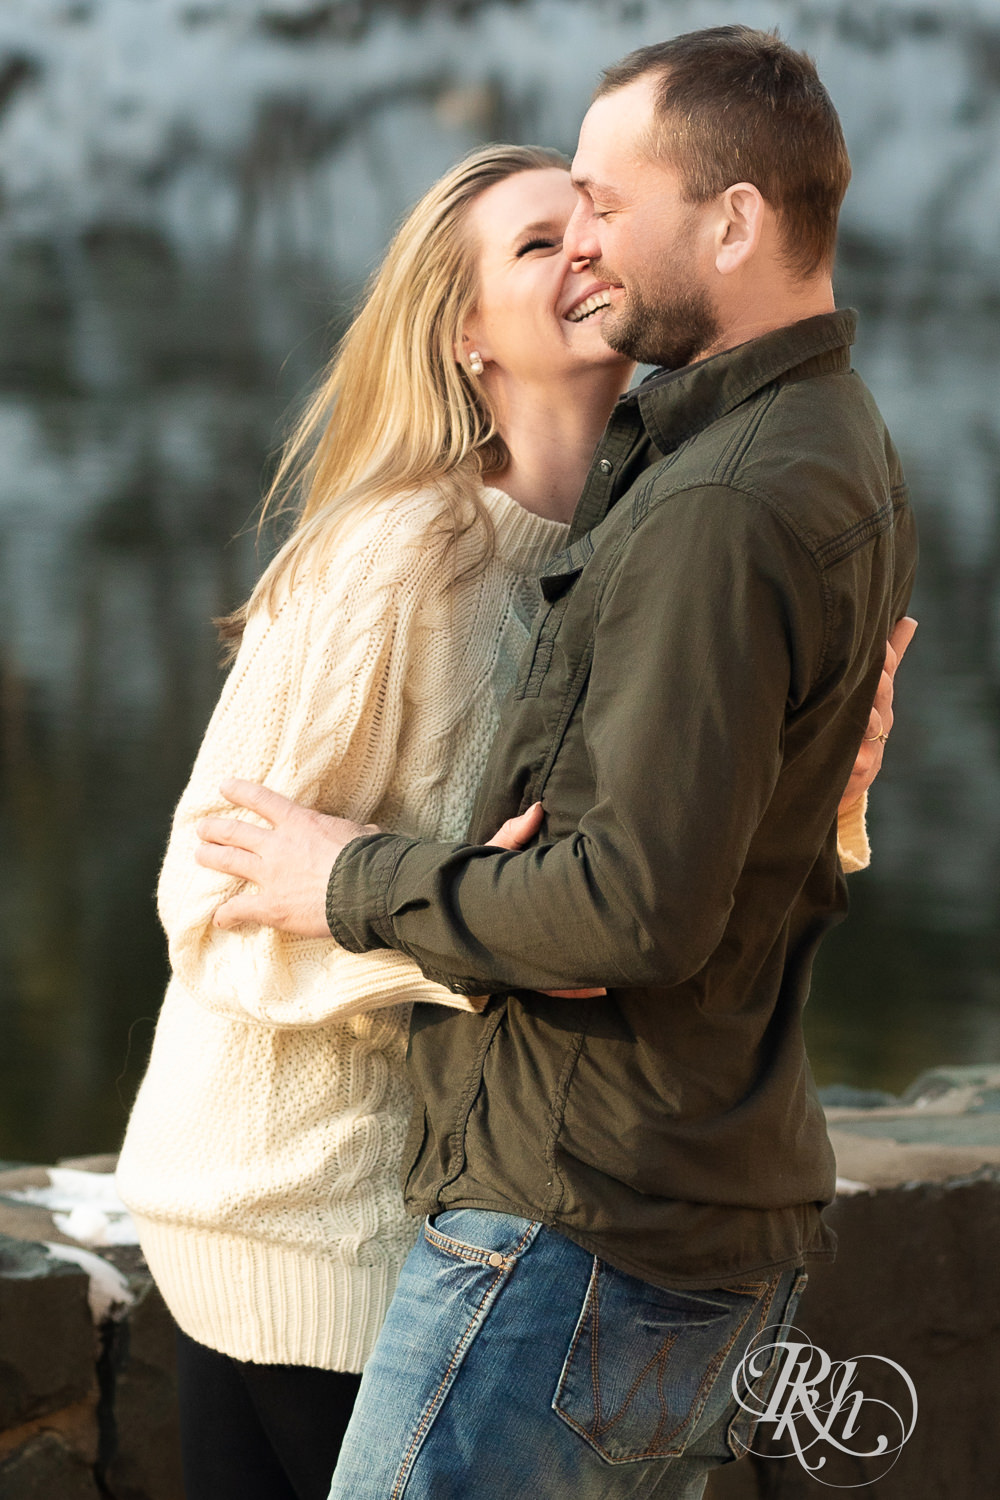 Man in jeans and green shirt and woman in a white sweater laugh during Taylor's Falls engagement photography session.